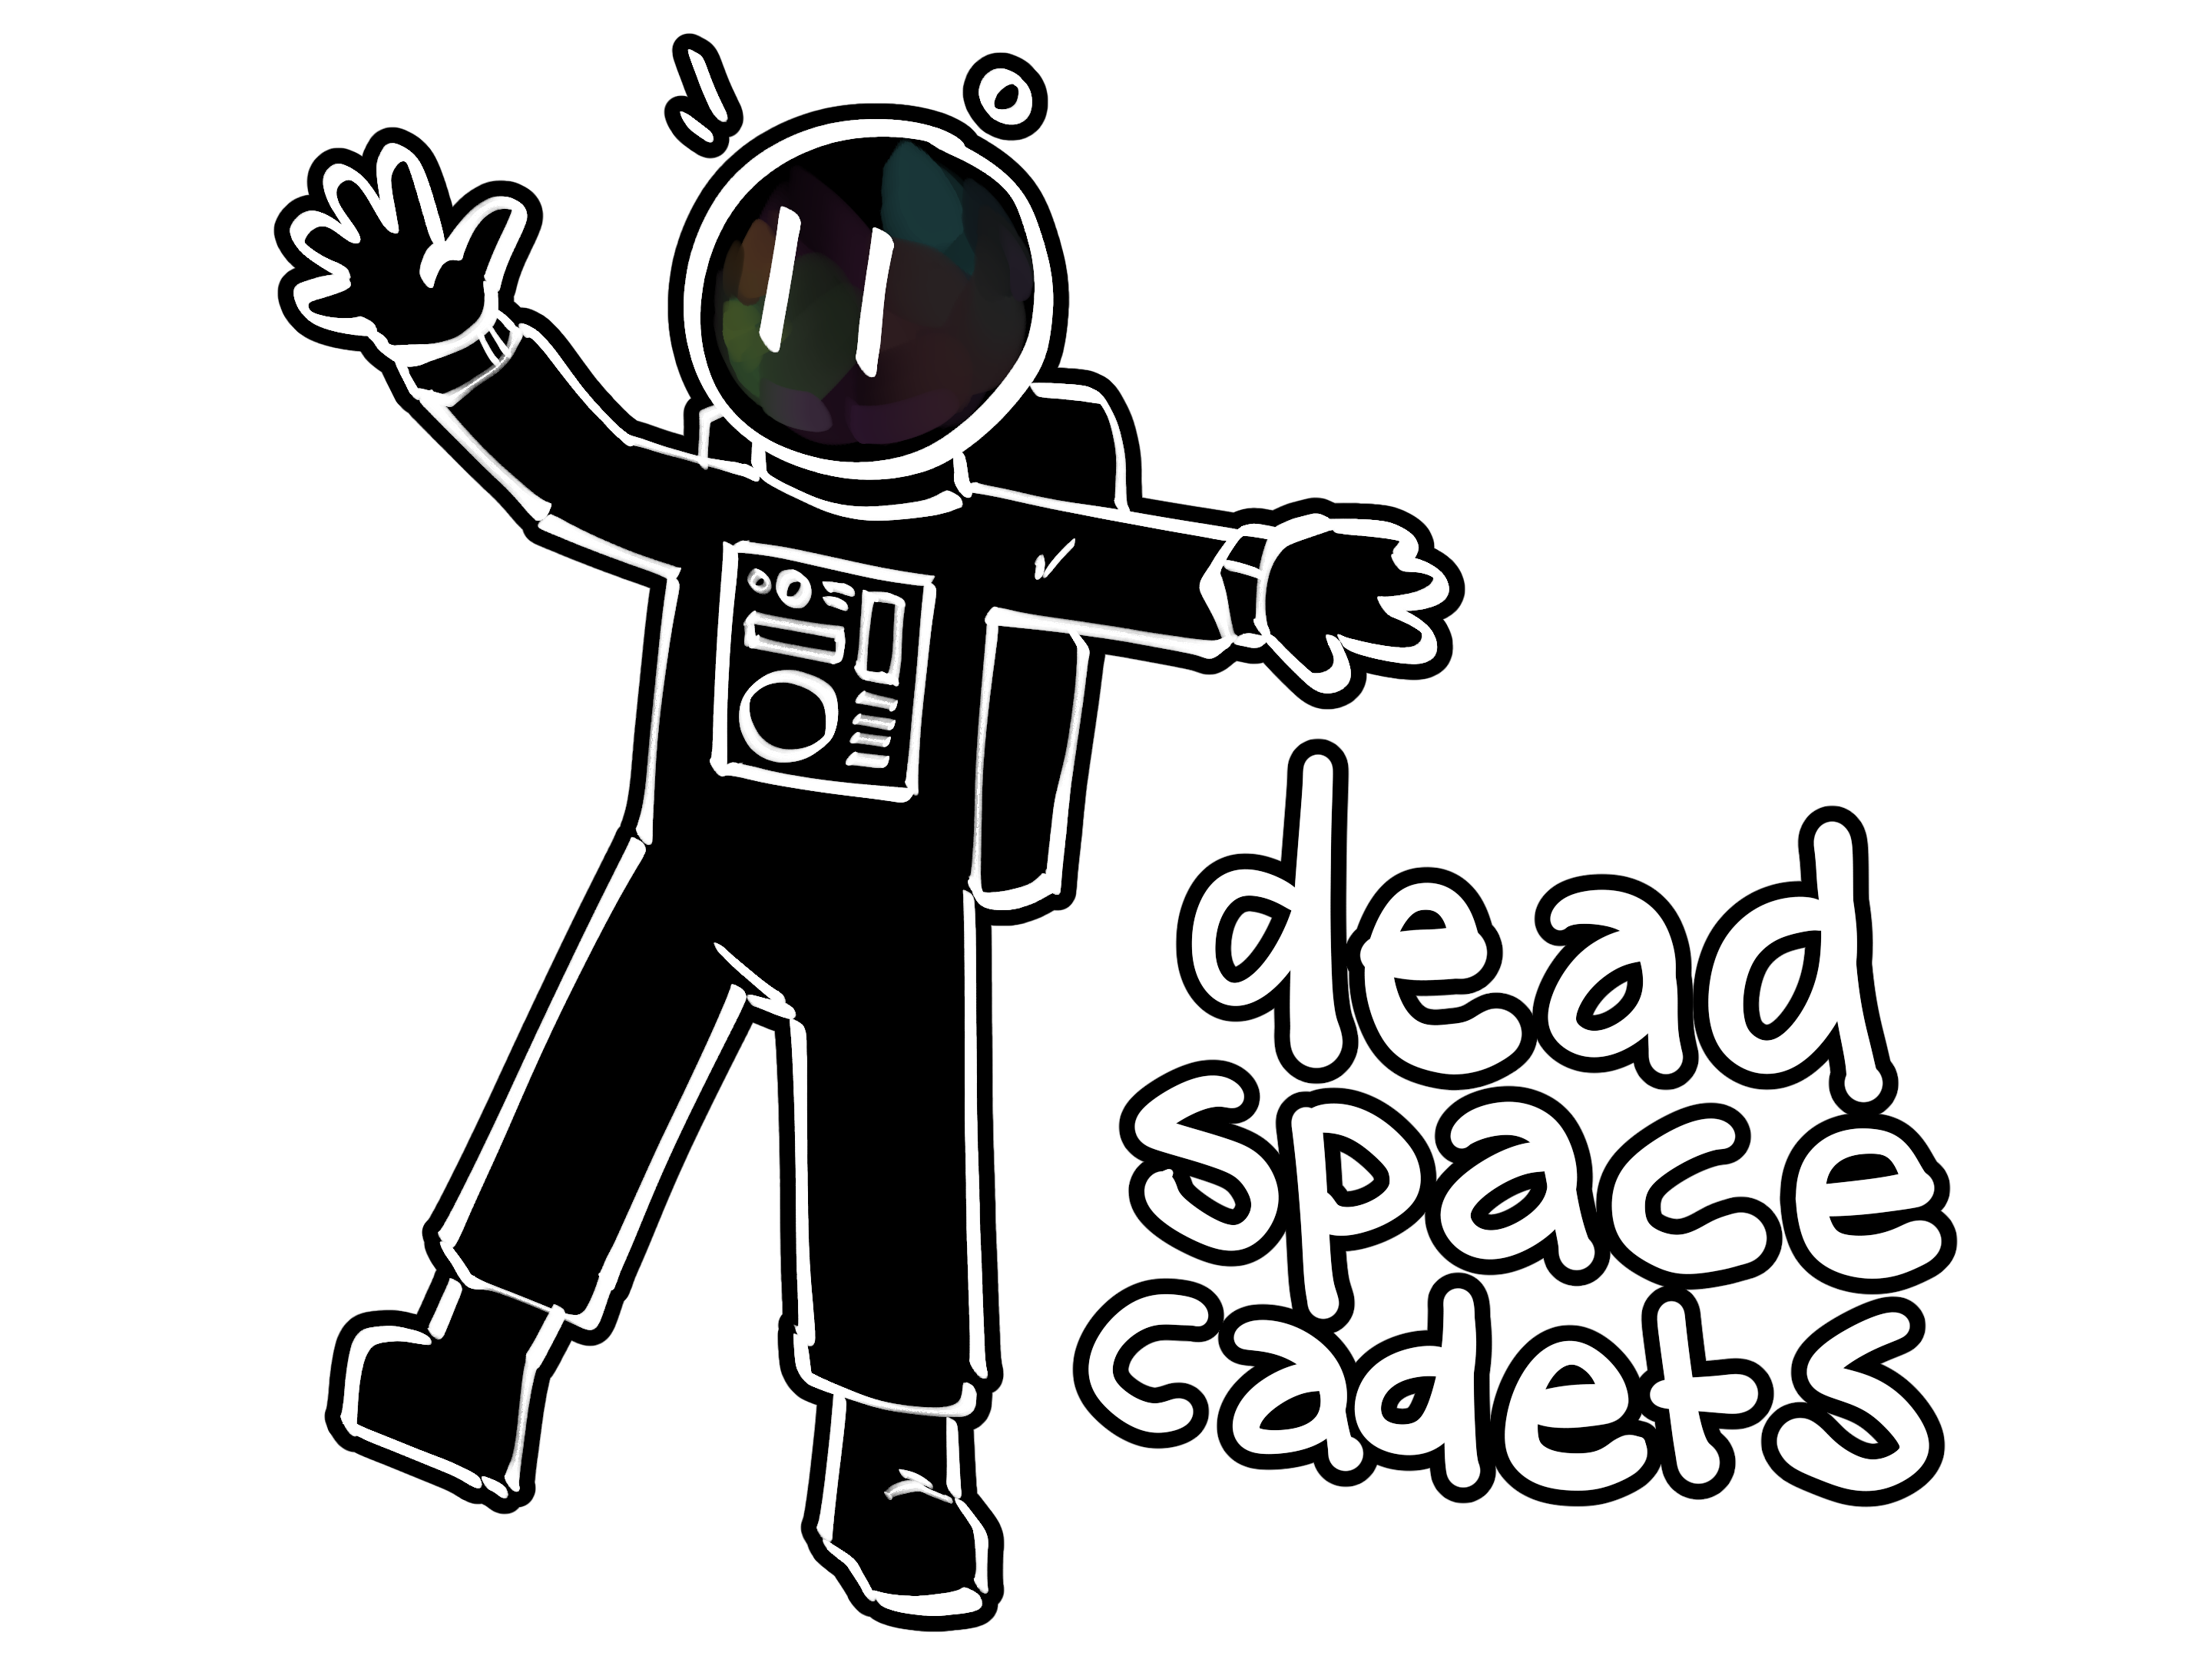 dead space cadets logo